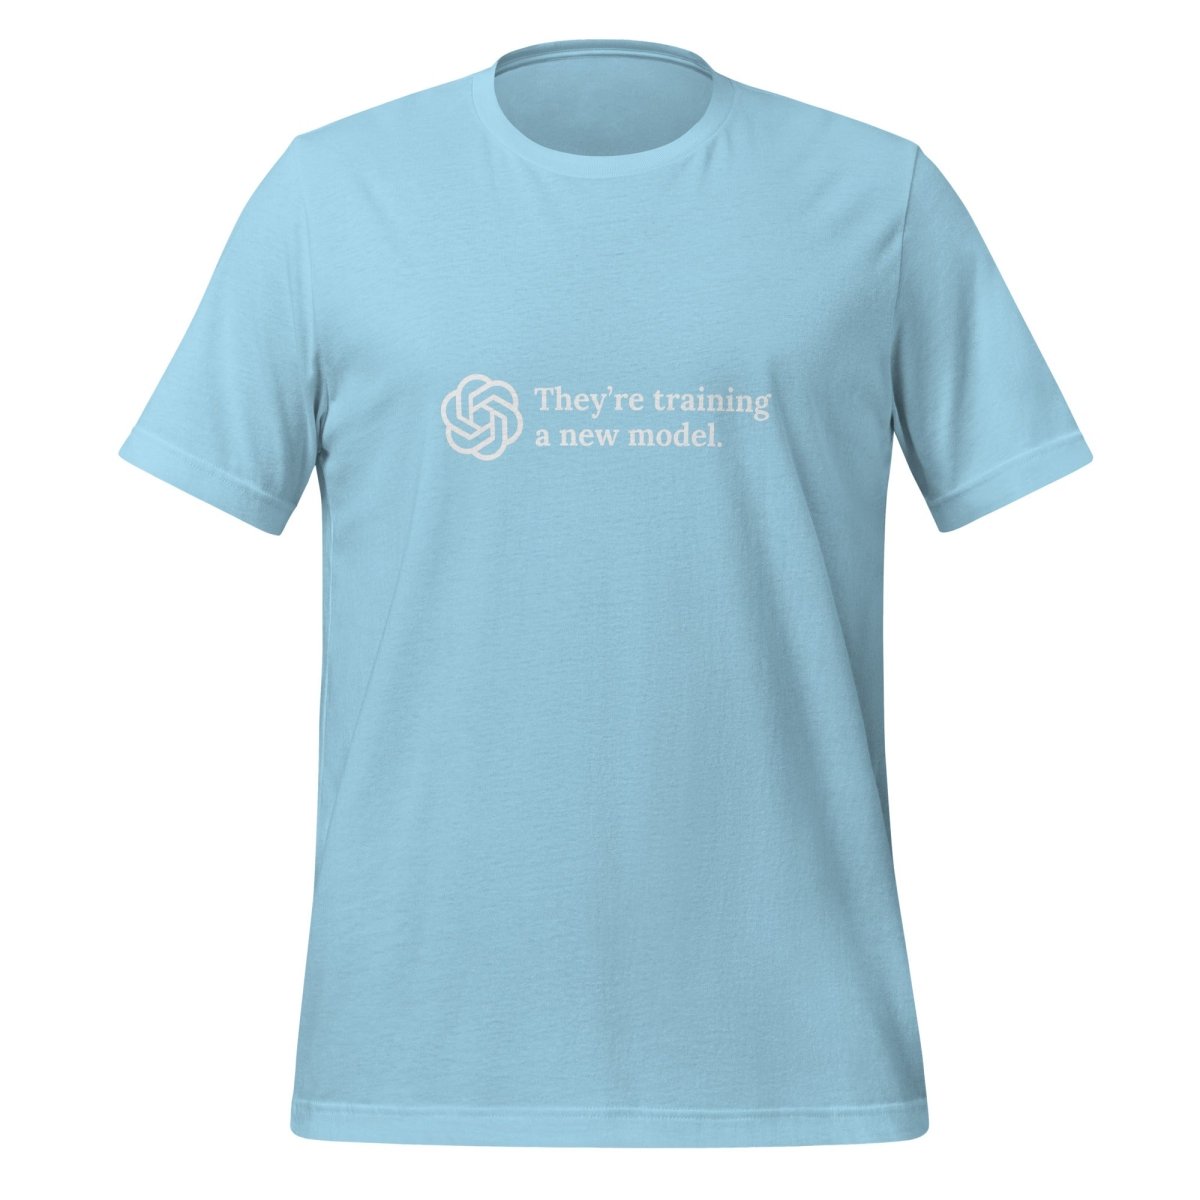 They're training a new model. T - Shirt (unisex) - Ocean Blue - AI Store